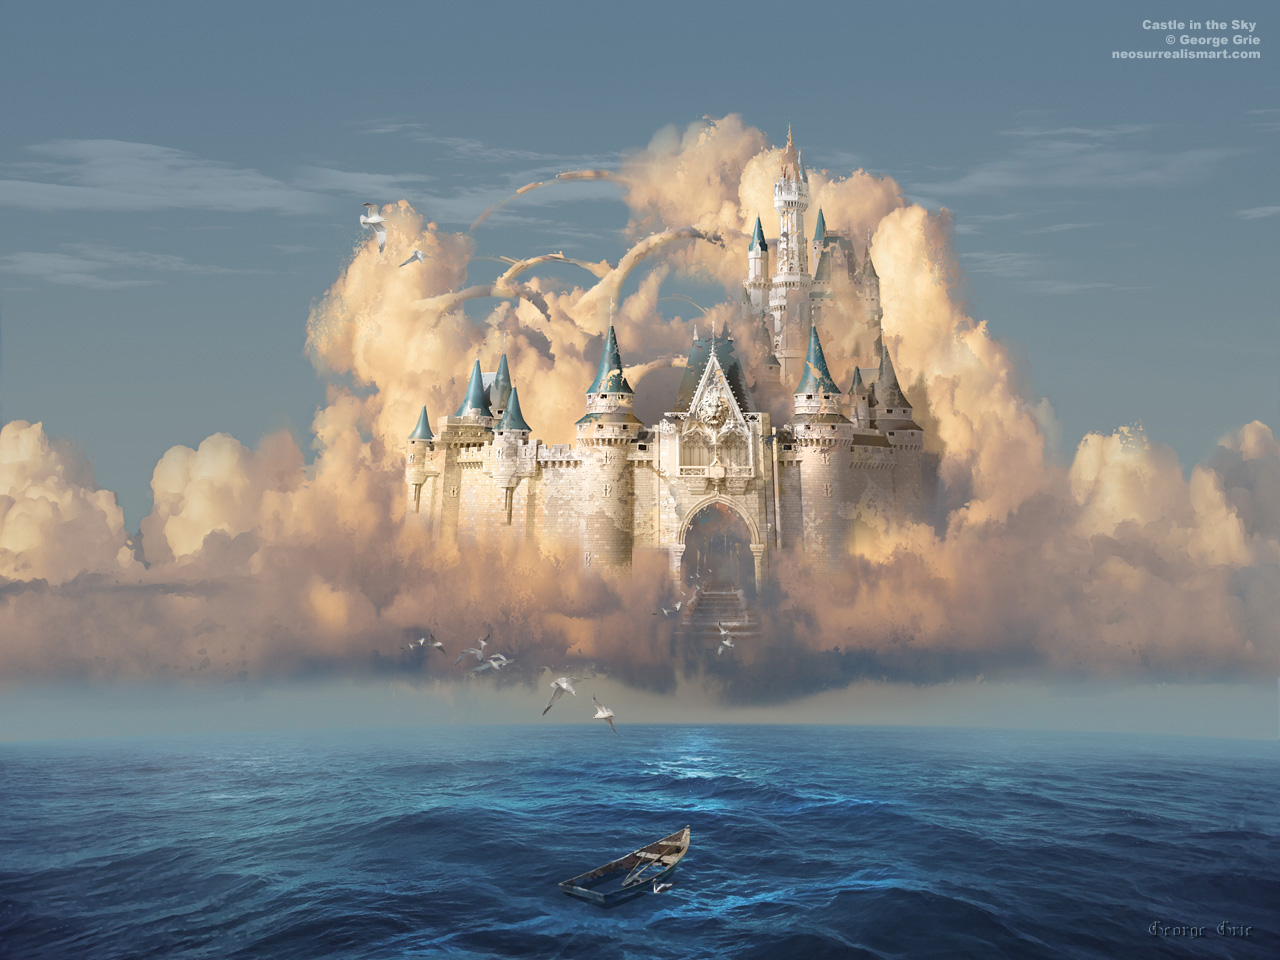 Free computer desktop wallpaper:Castle in the Sky or Clouds of Shattered Dreams, Photo Manipulation, Surreal Art, One may build up dreams for years, but it takes only seconds to shutter them away. We all form dream castles of hopes founded on the clouds of desire throughout our lives. It does not do much good to live in cloudy imaginings and forget to live for real t